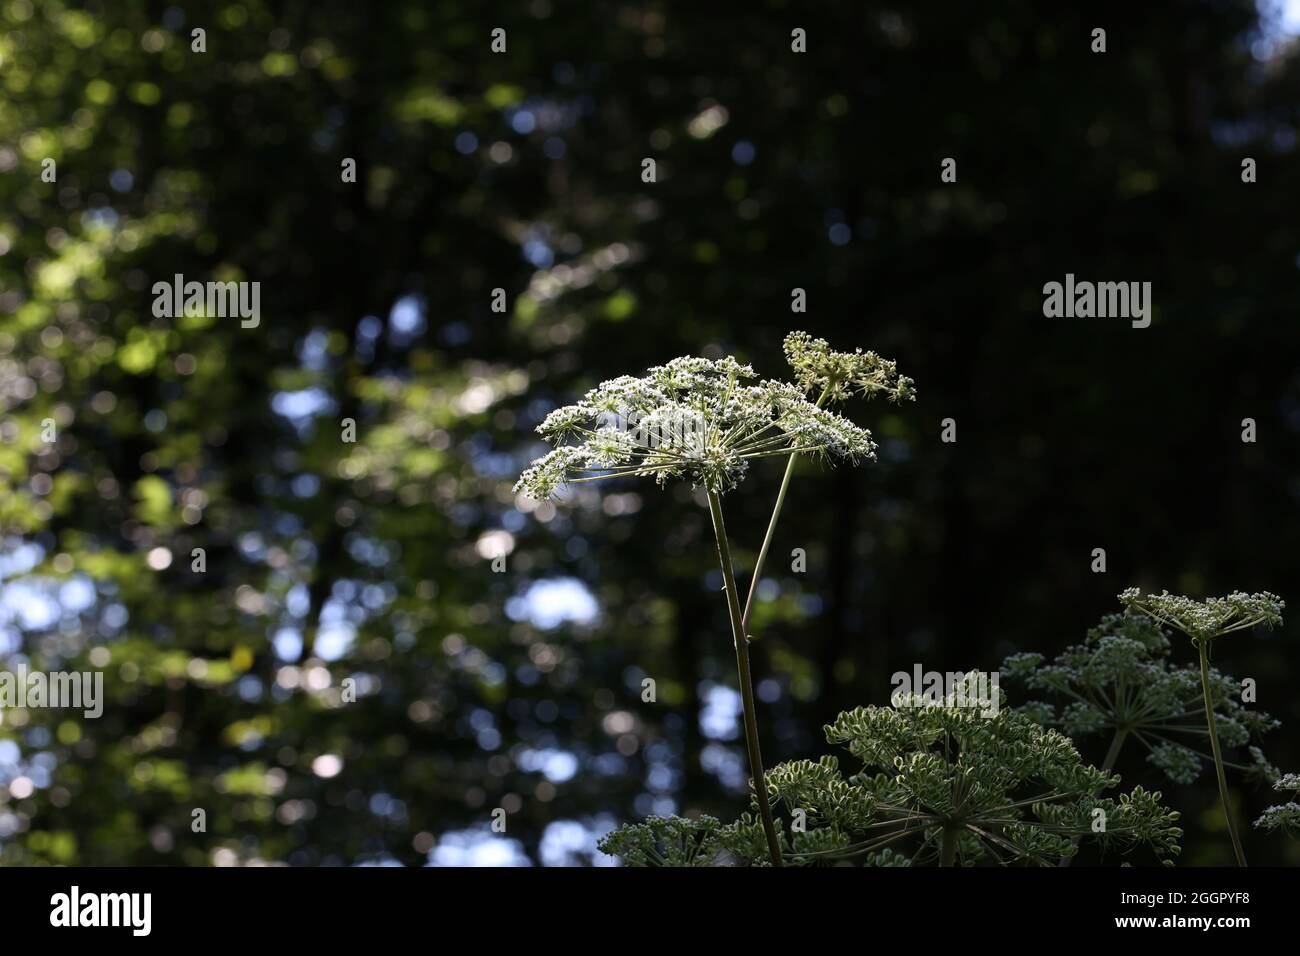 Hite flowering plant caraway or meridian fennel Stock Photo